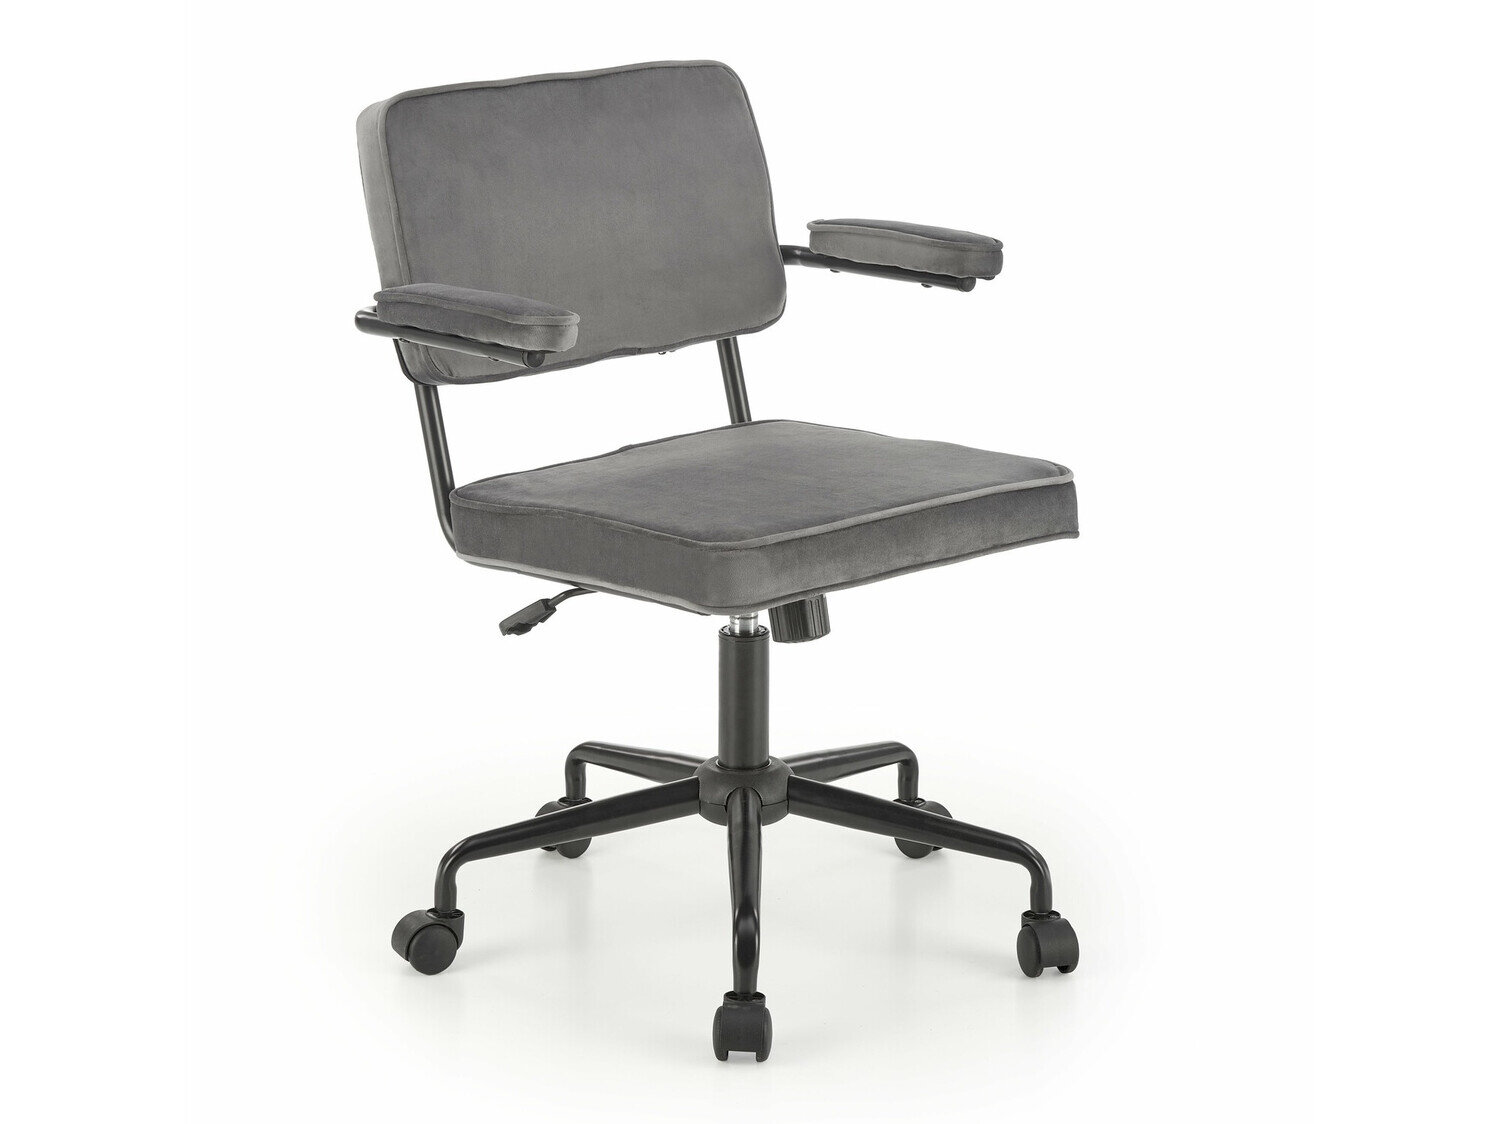 Office chair Houston 1393 - Office furniture 